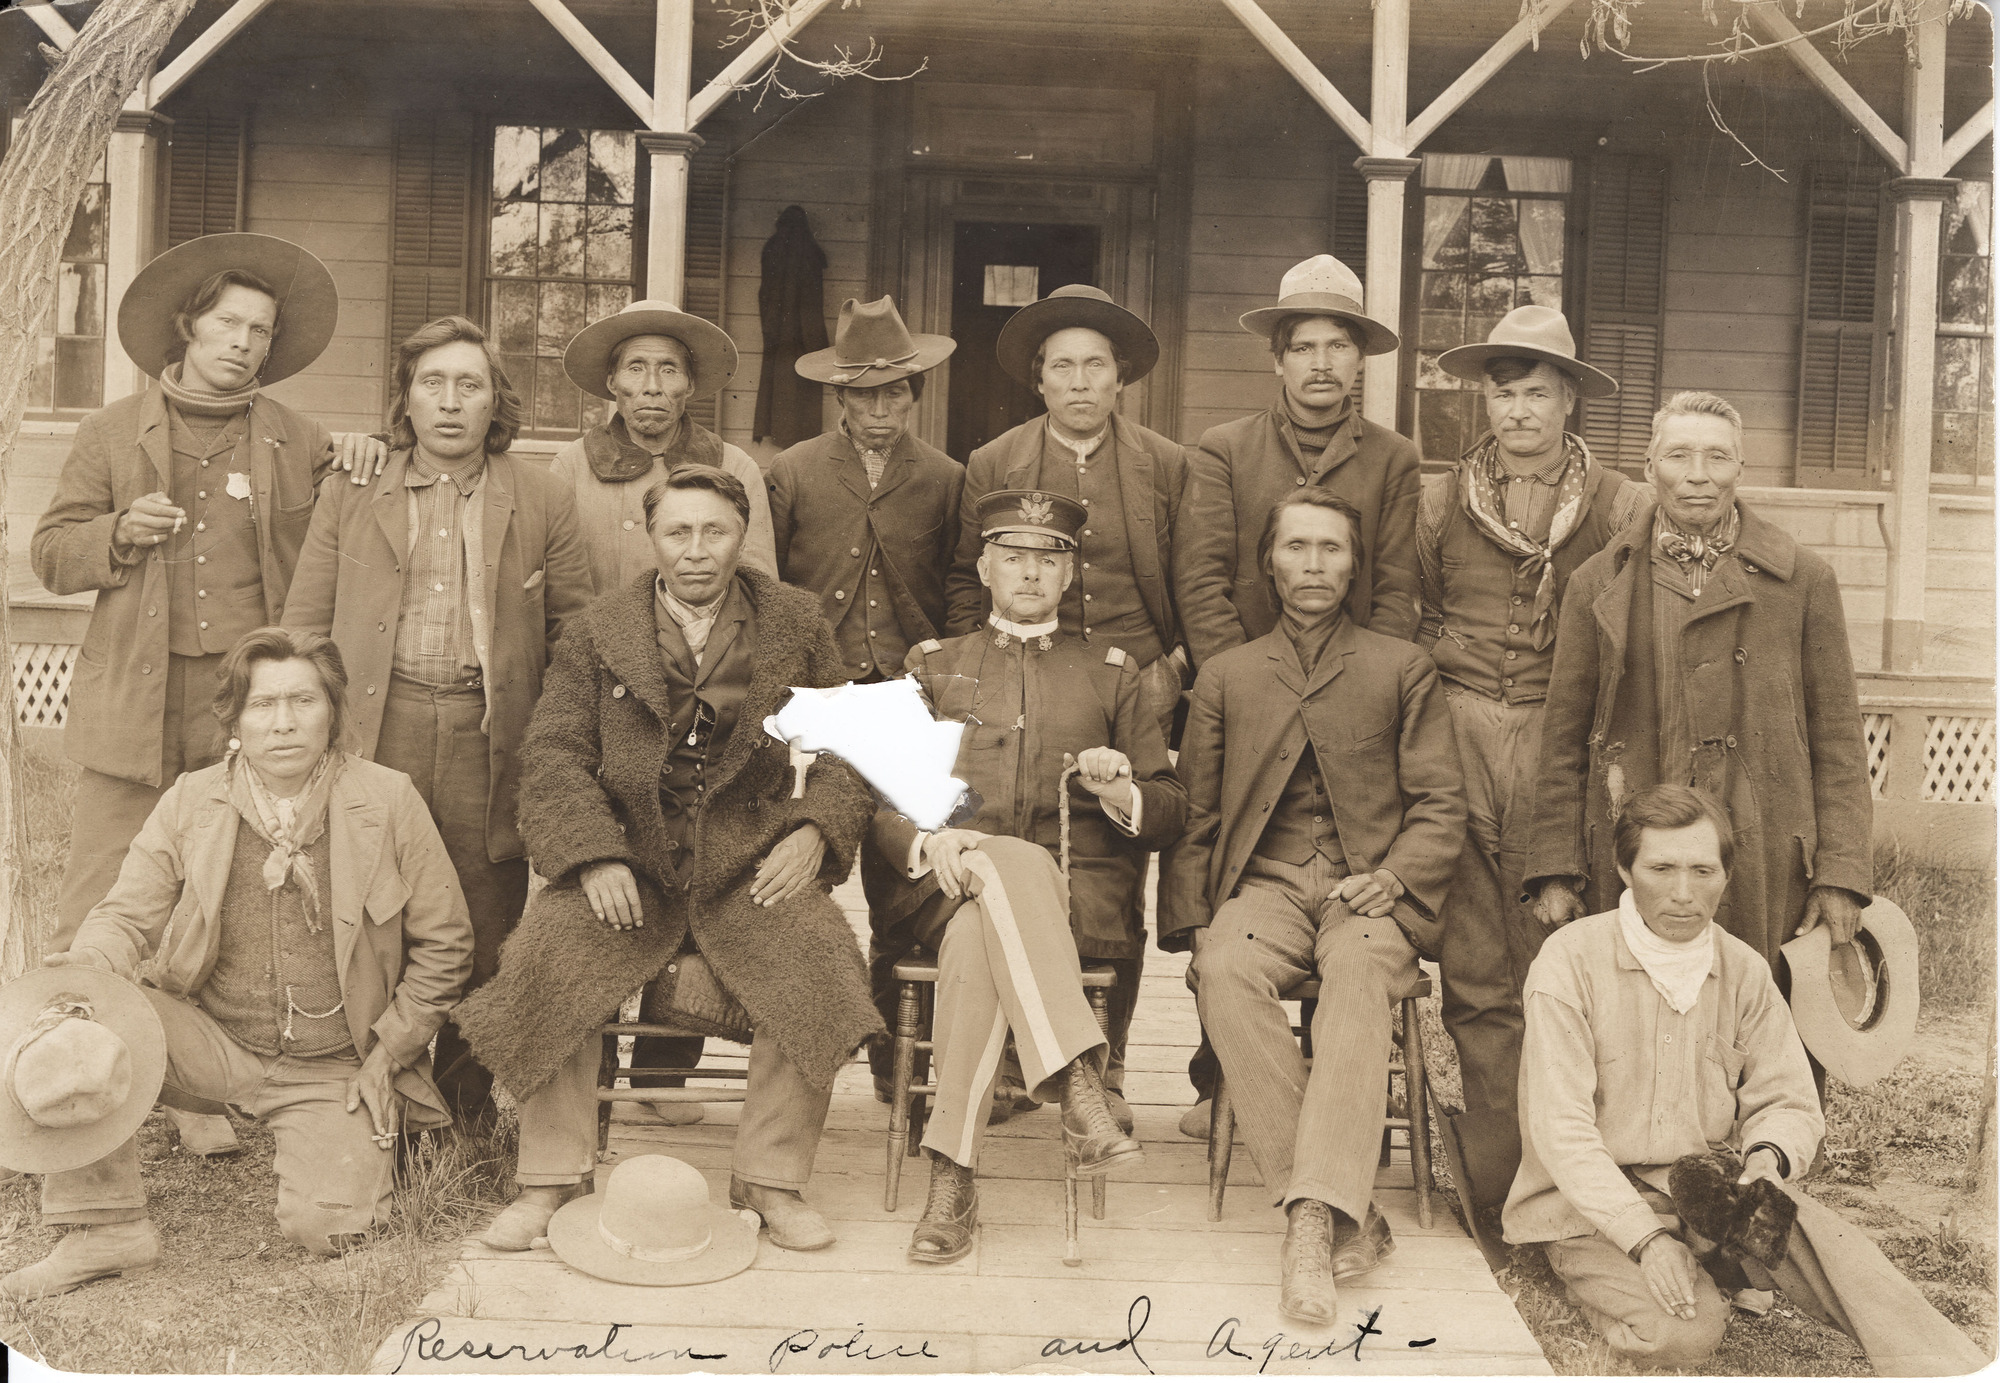 Black and white photograph of American Indians in western clothes sitting and standing for a photograph with a soldier in the middle